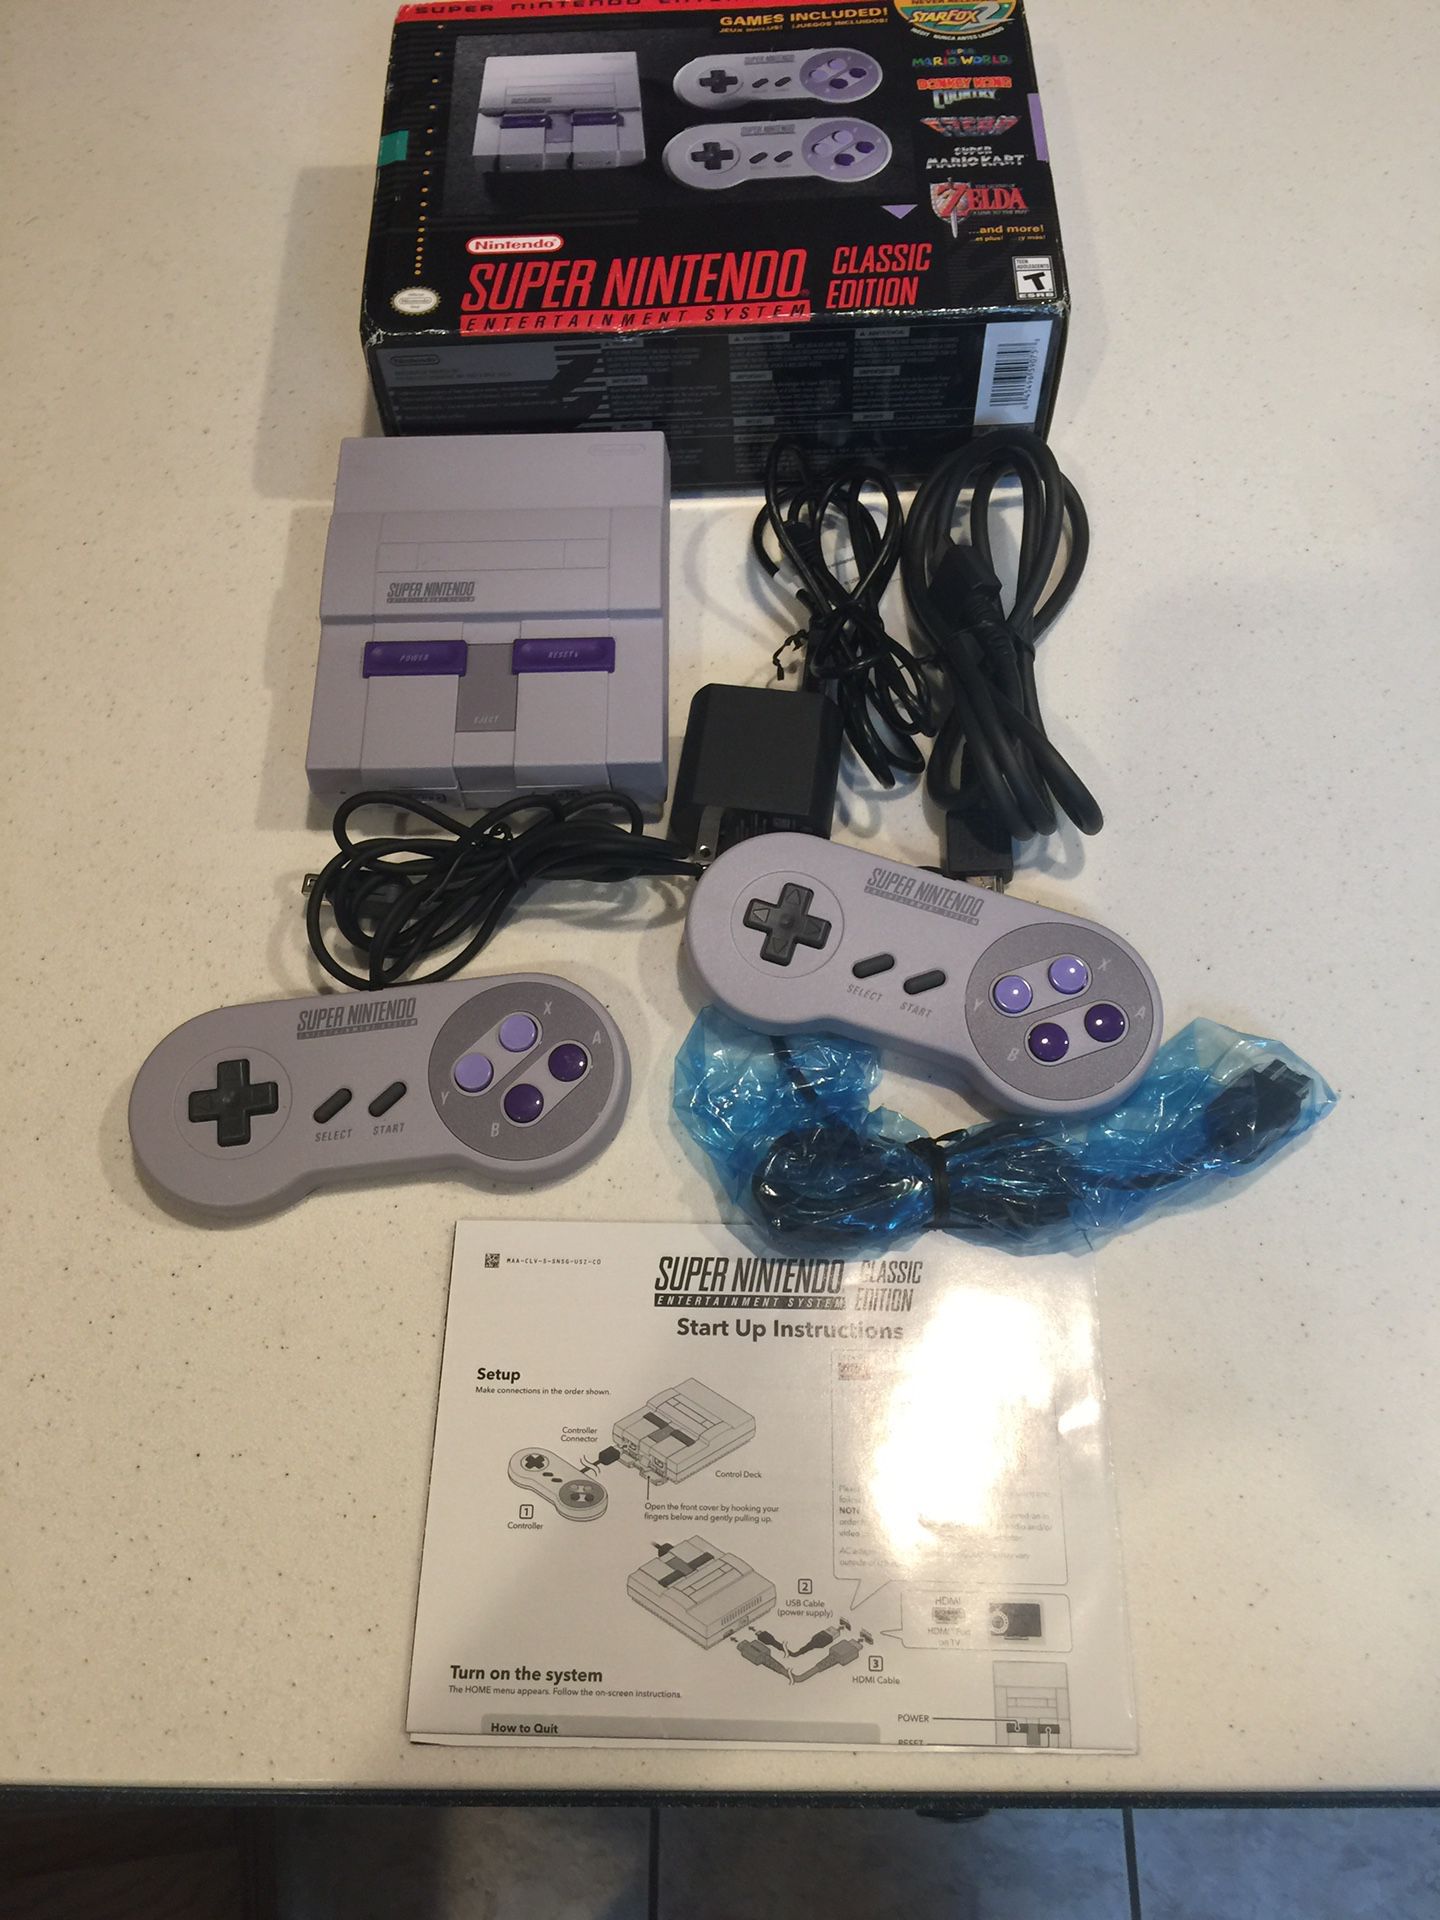 Super Nintendo mini modded with 1200 games